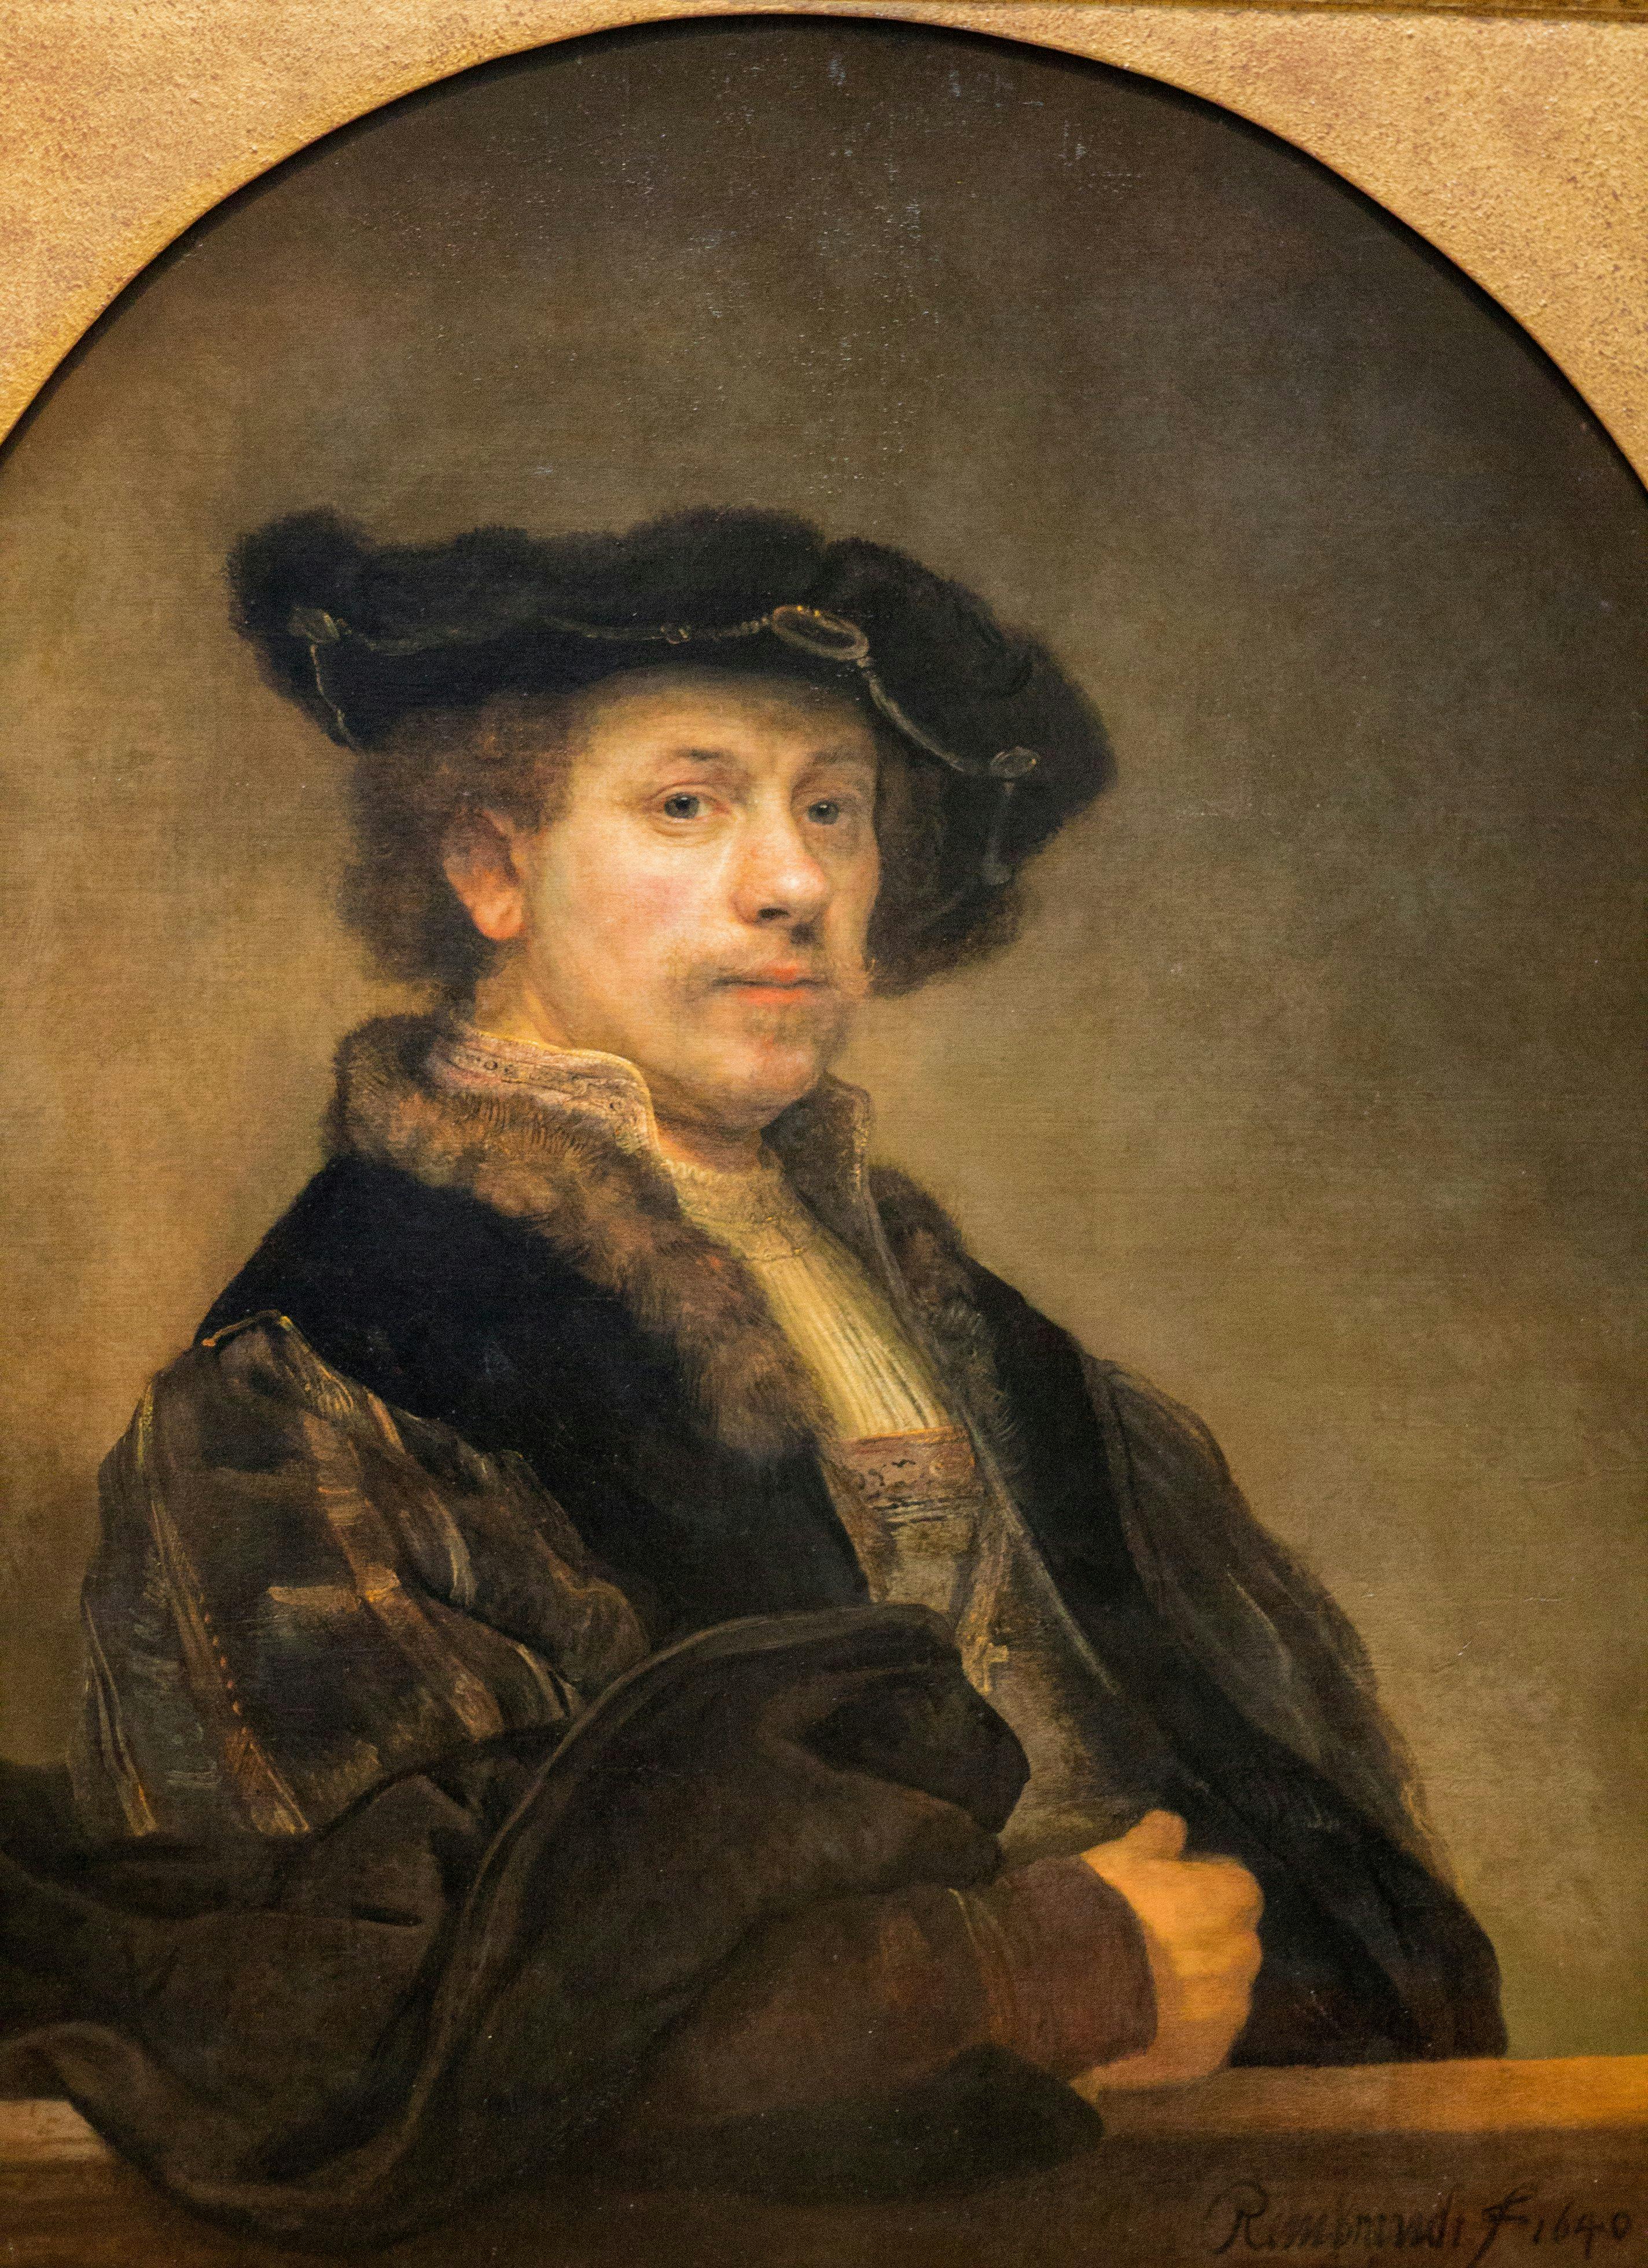 Is it a Rembrandt? Reflections from the Eastern Analytical Symposium